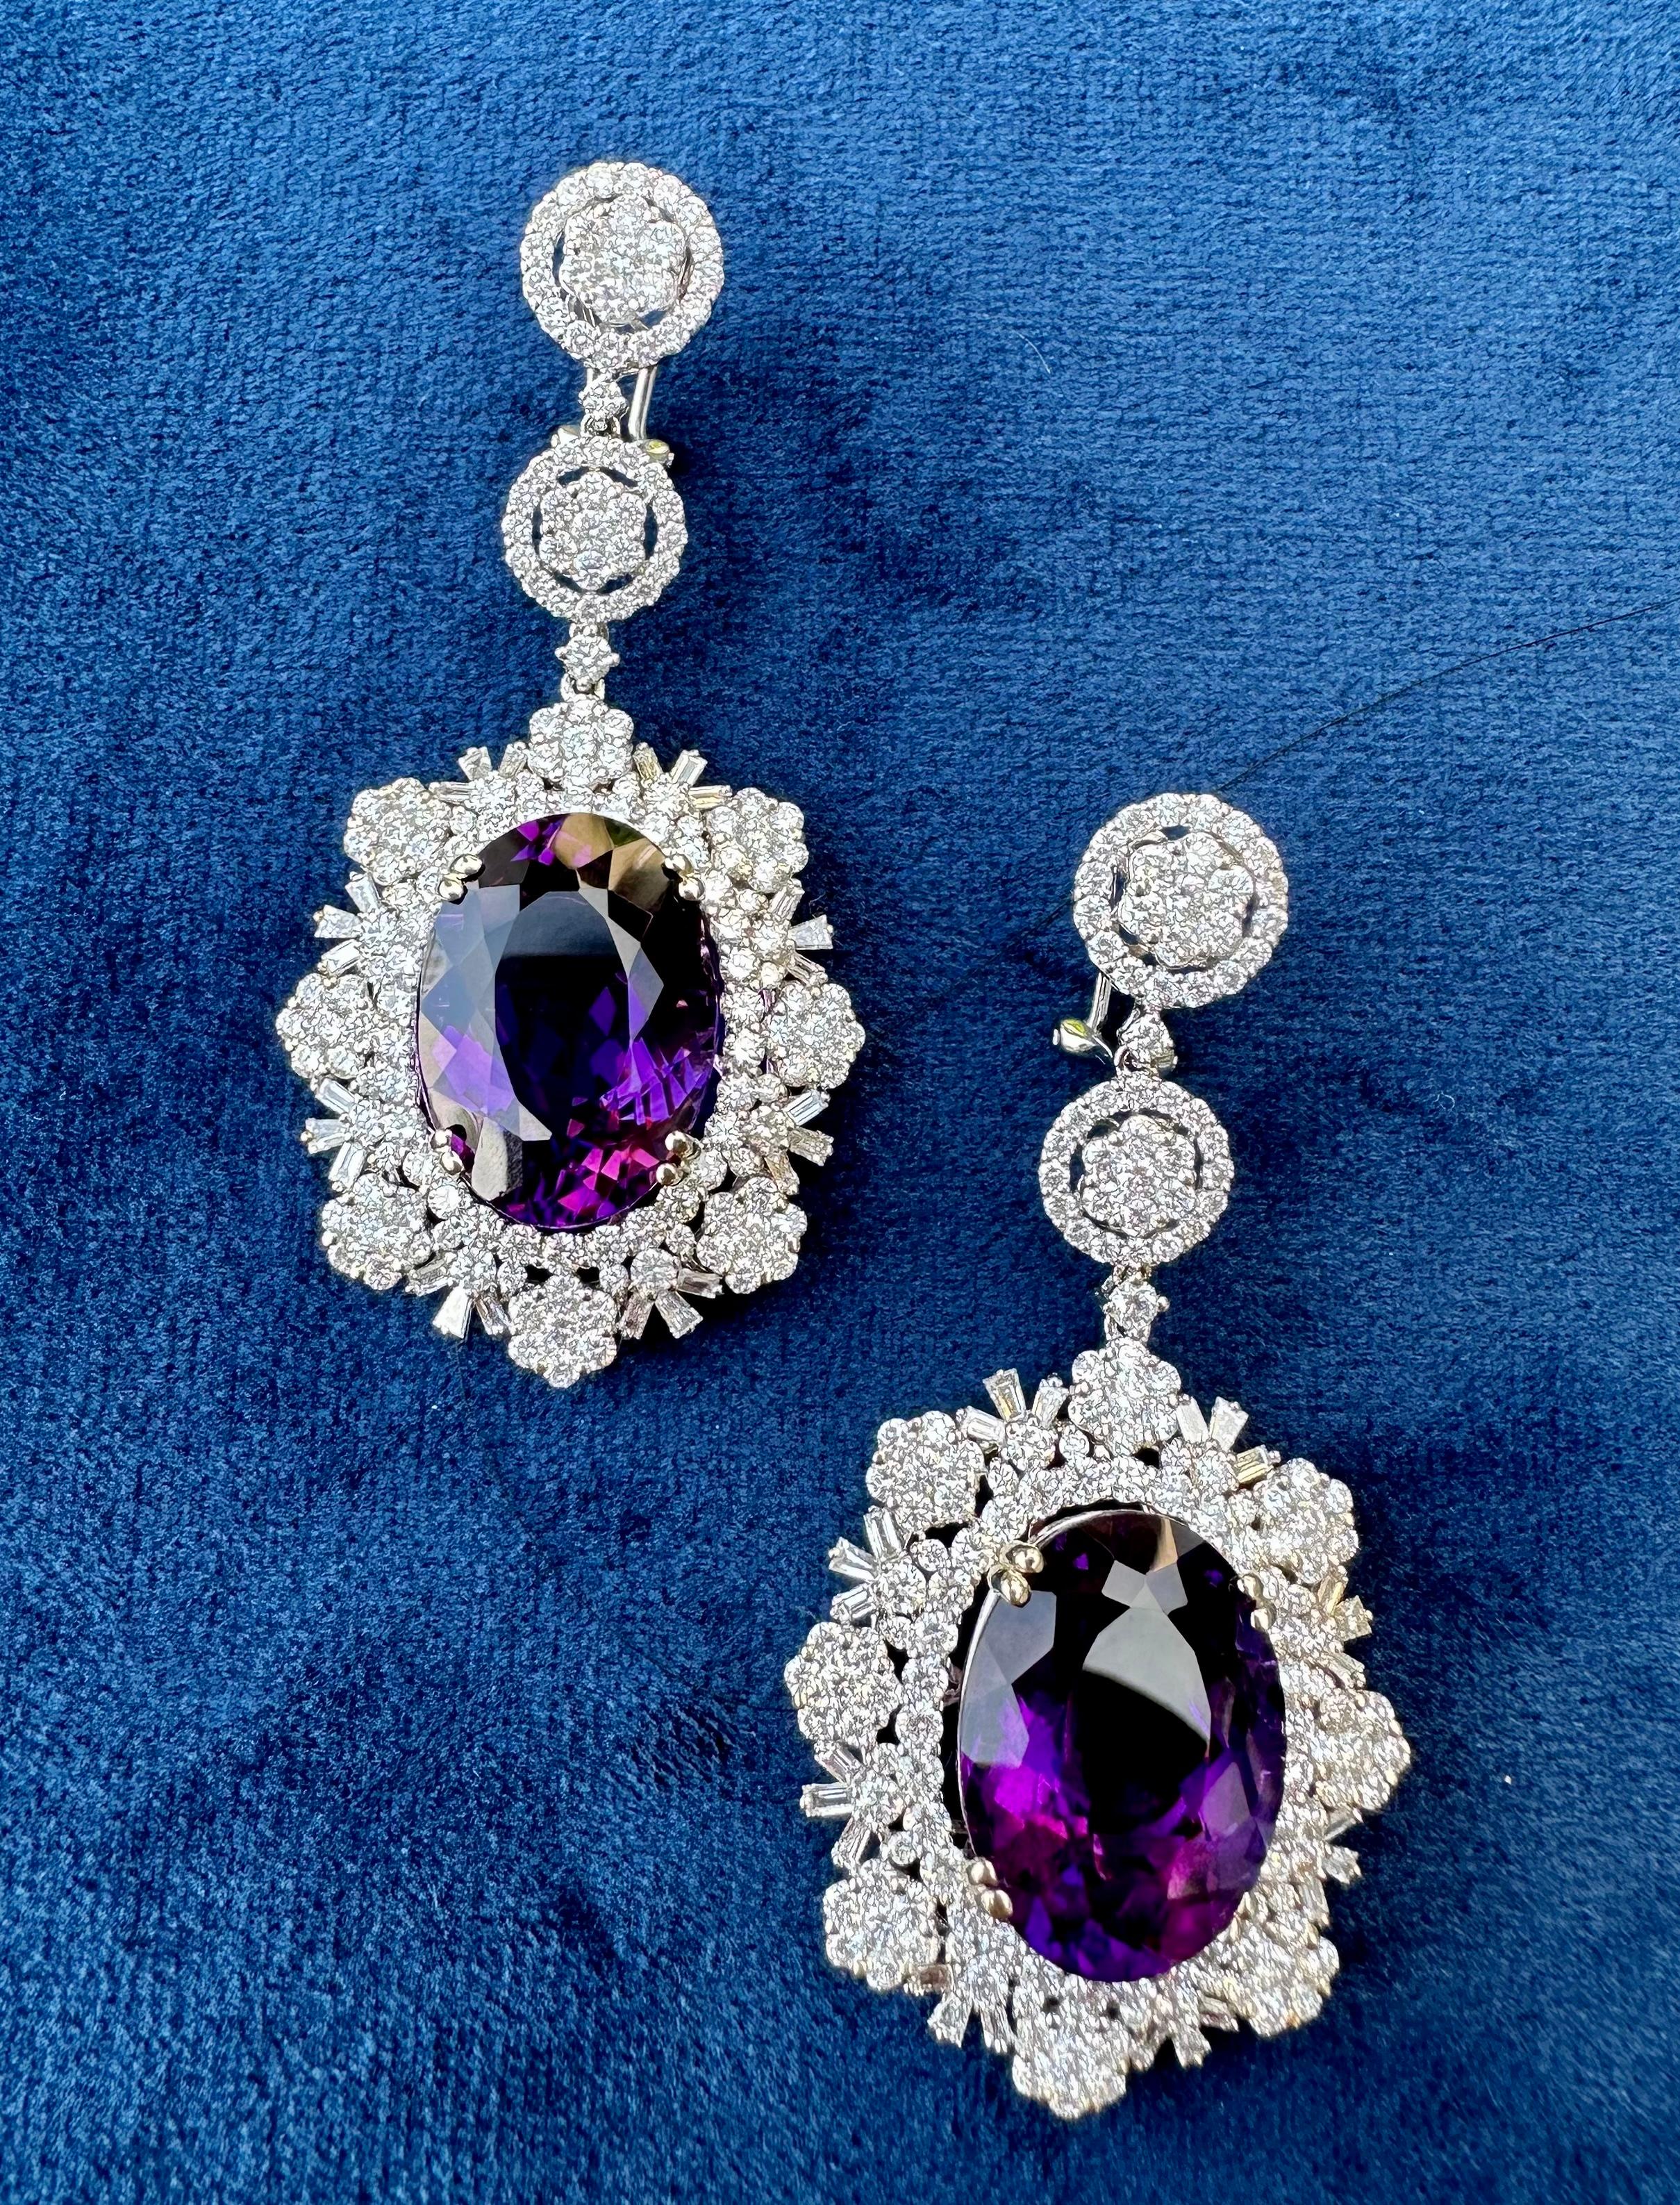 Women's  Magnificent 137.22 Carat Amethyst and Diamond Necklace, Earrings, and Ring Set